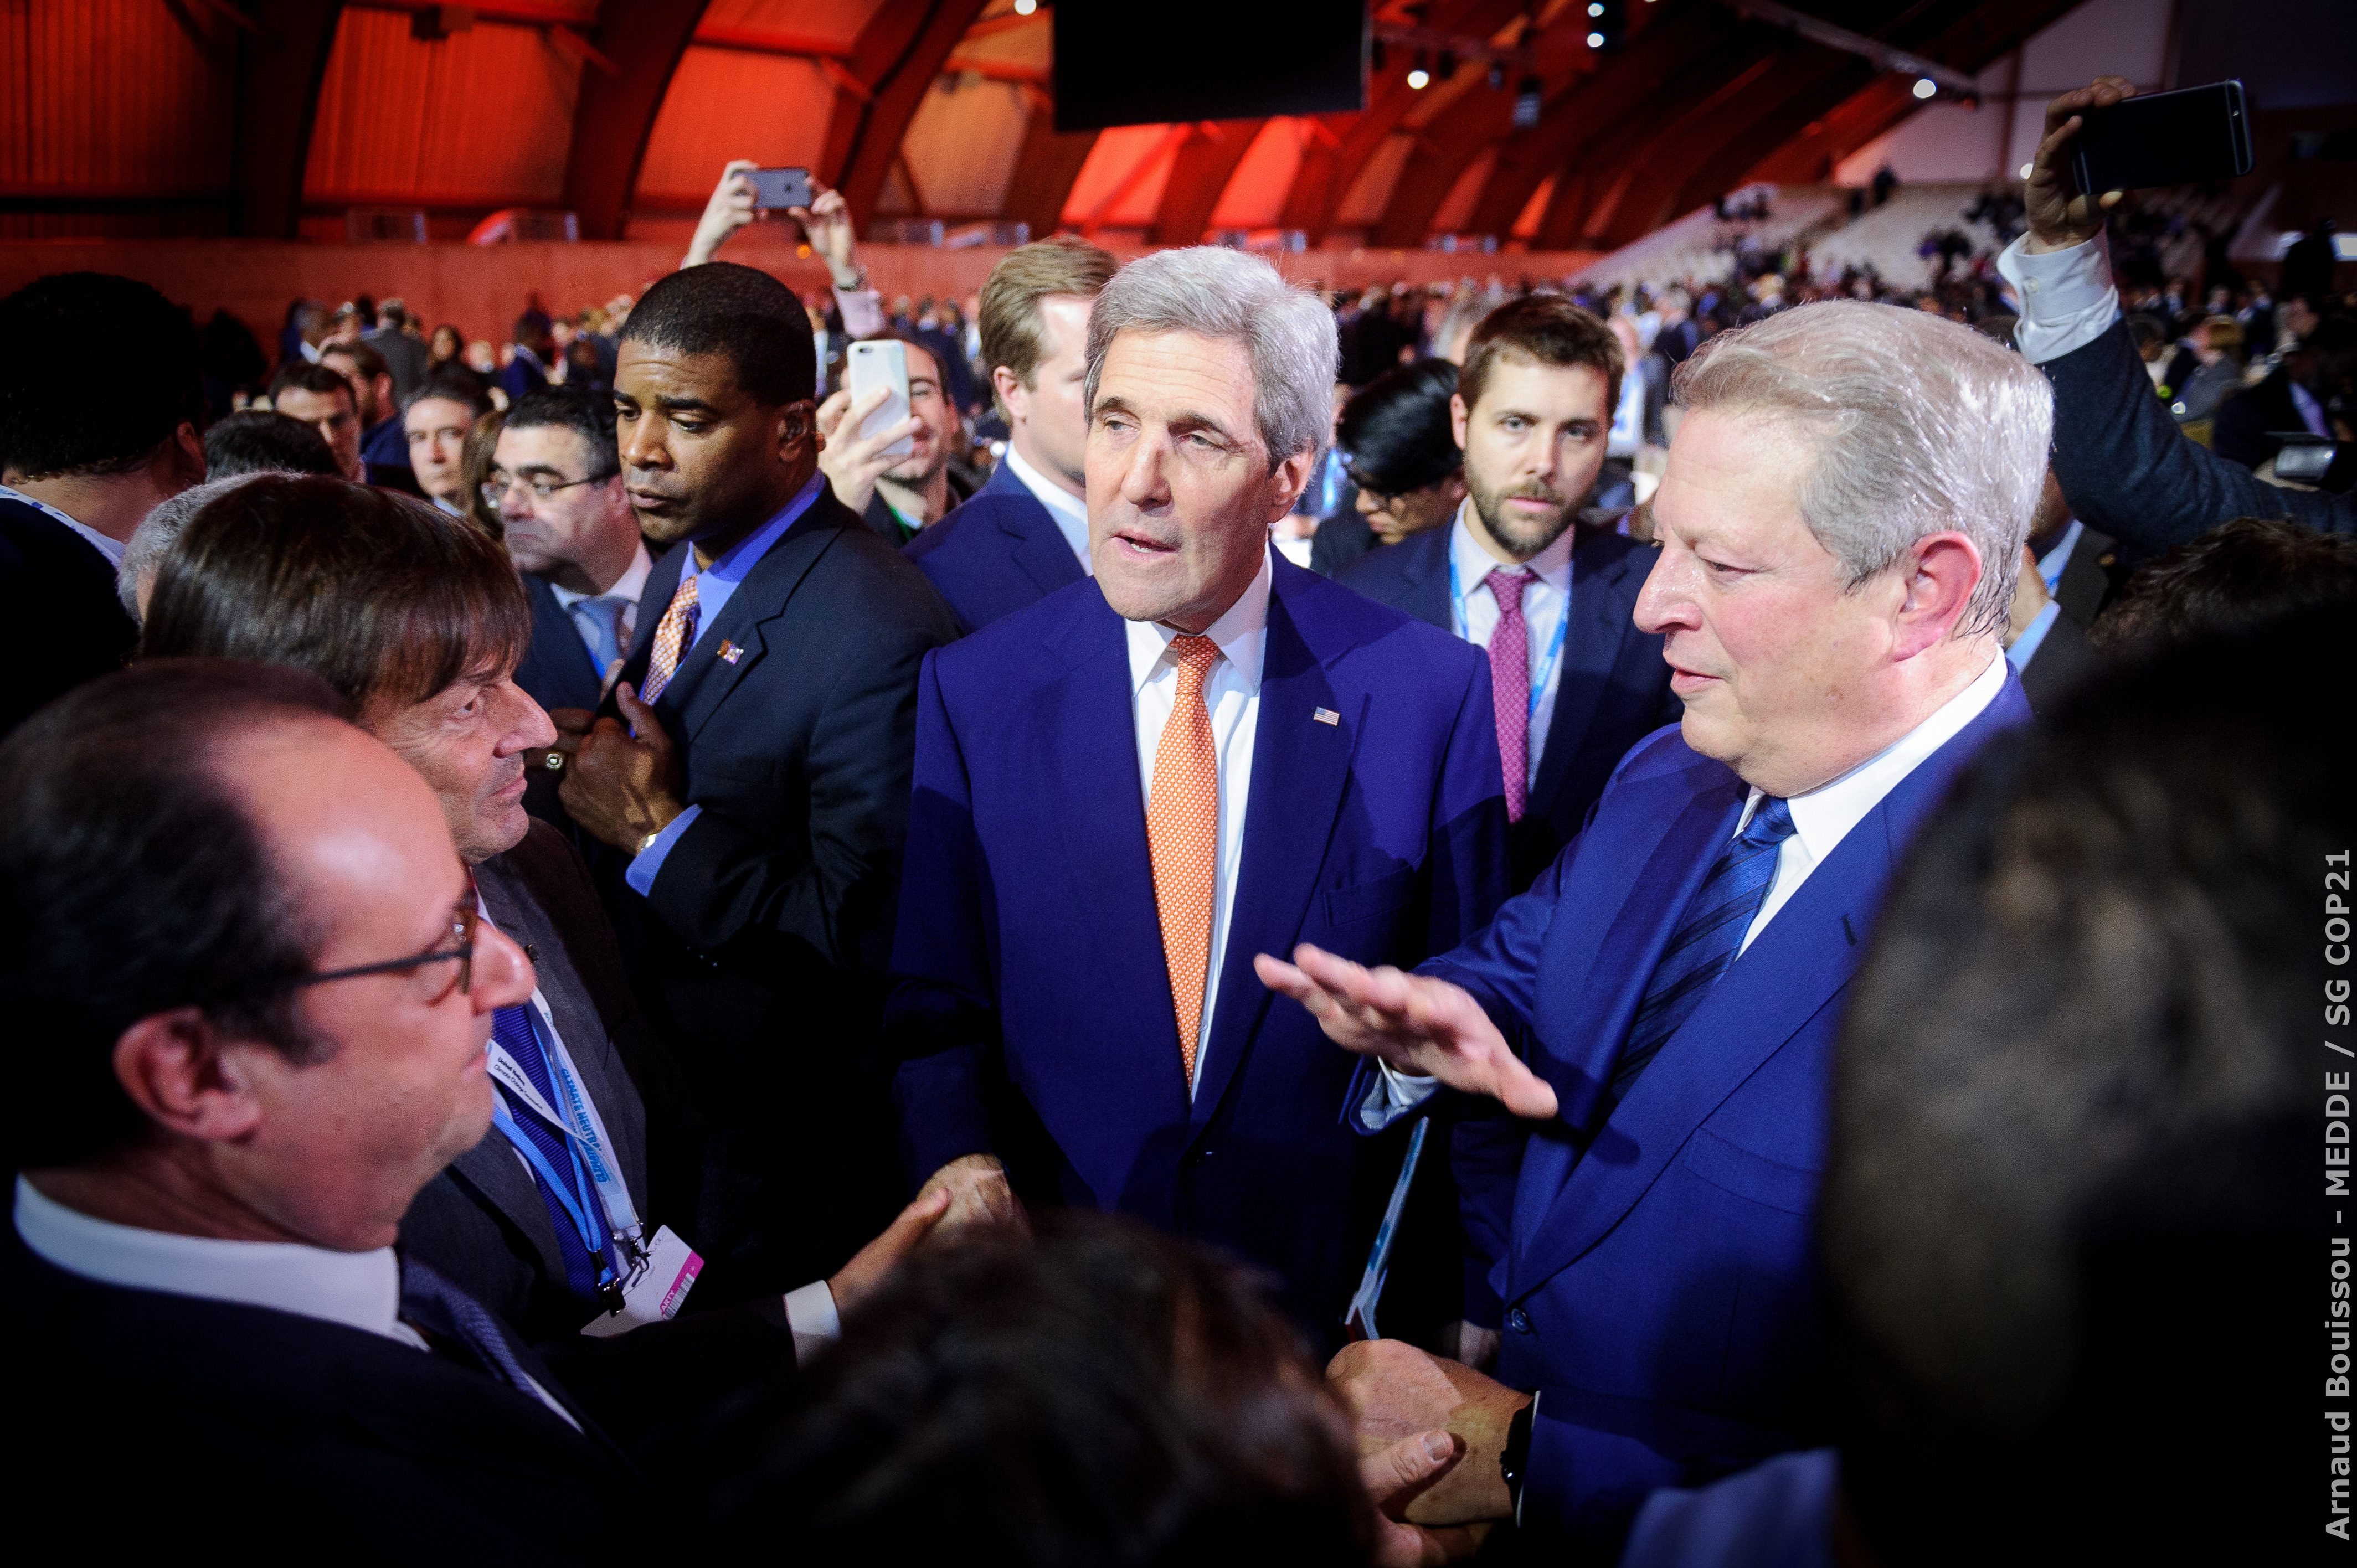 LANDMARK PACT. Climate Reality Project chairman Al Gore joins other world leaders in witnessing the adoption of the landmark global warming pact at the COP21 Climate Conference in Le Bourget, north of Paris, on December 12, 2015. Photo by Arnaud Bouissou/MEDDE   